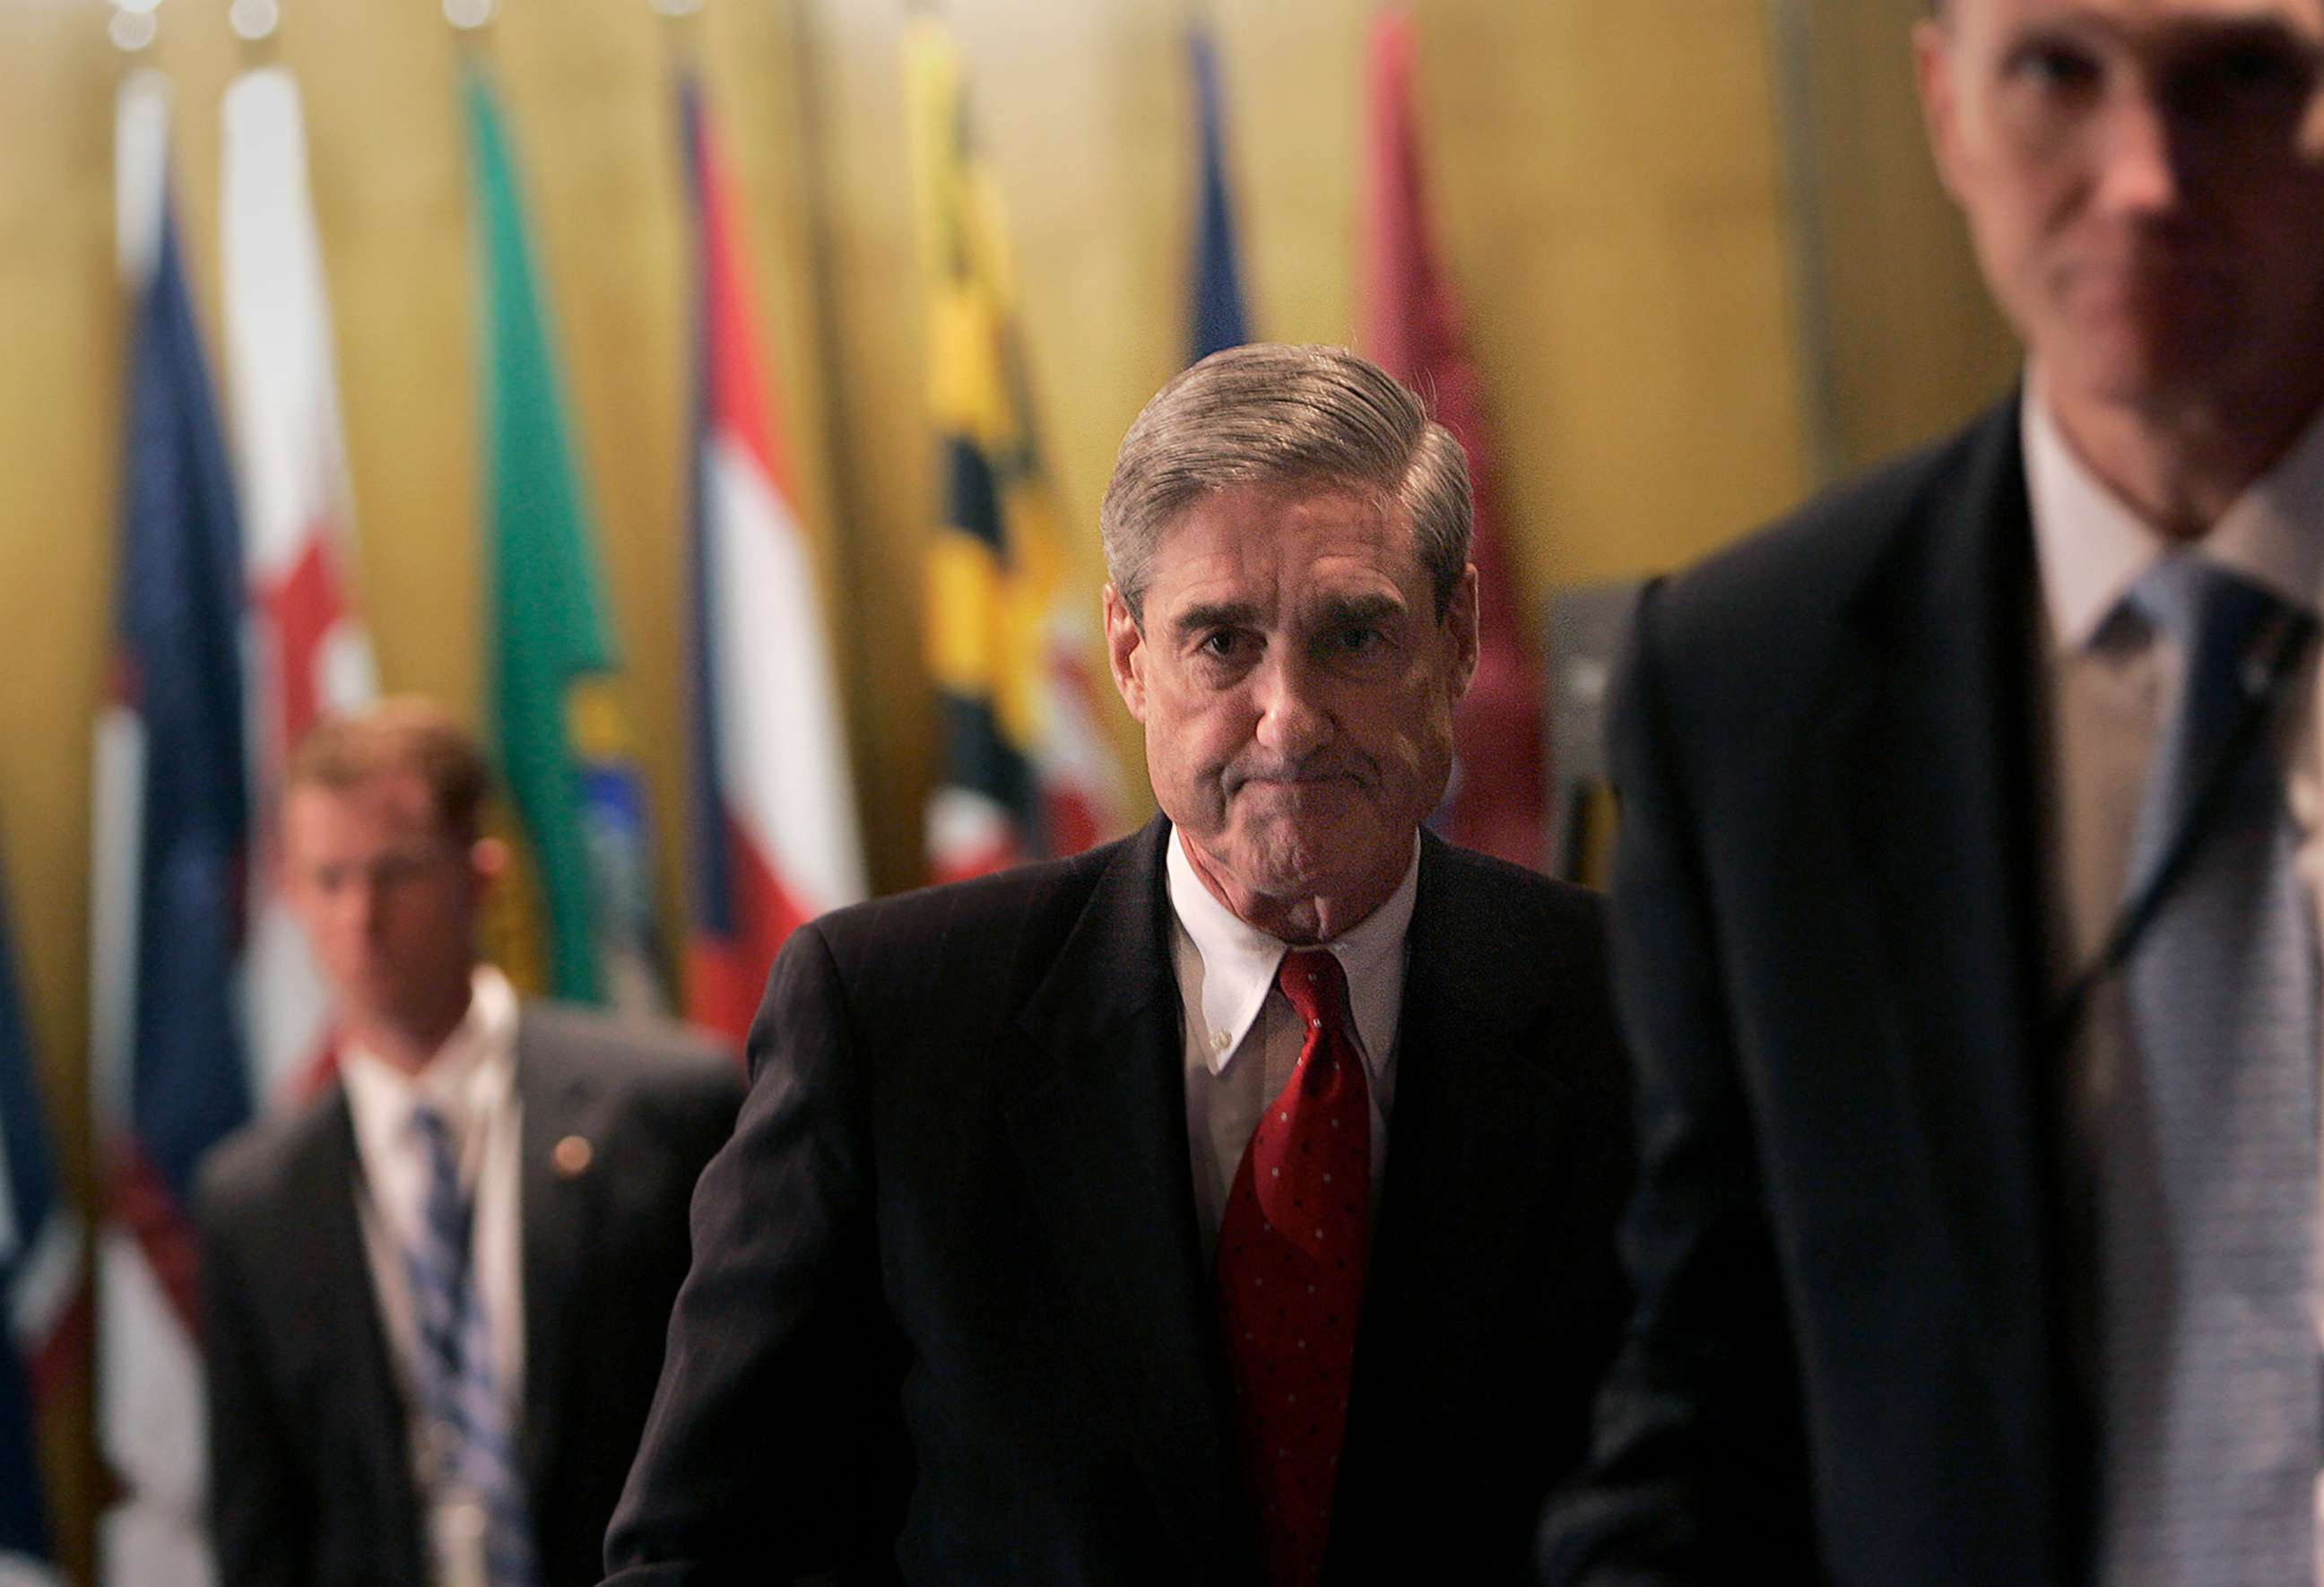 PHOTO: FBI Director Robert Mueller leaves a news conference at FBI headquarters in Washington, March 9, 2007.